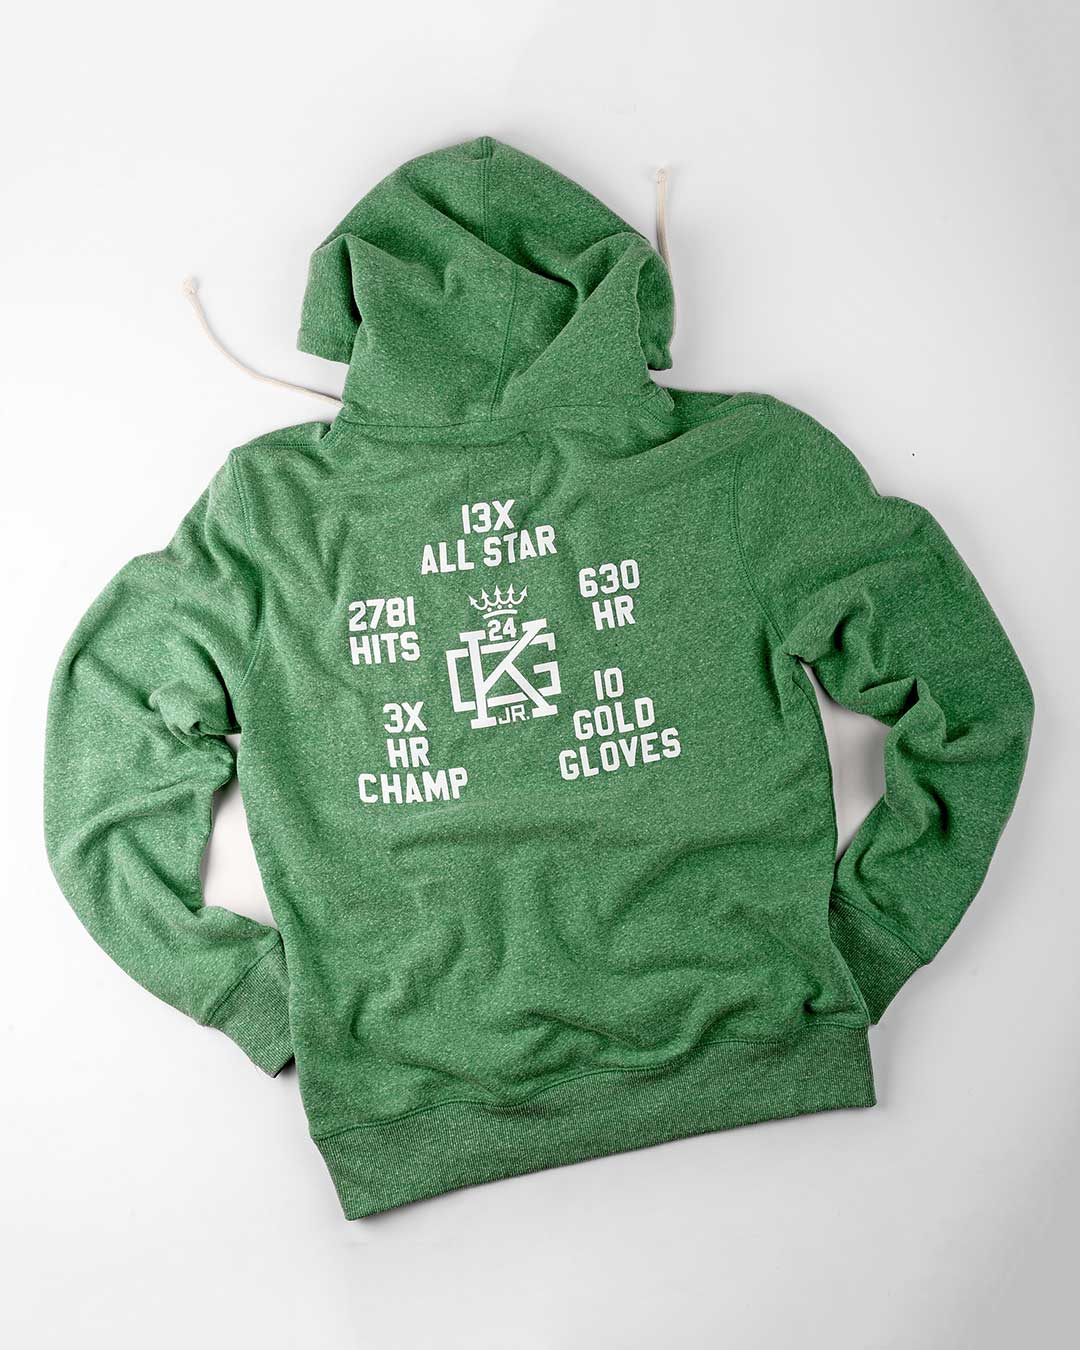 Ken Griffey Jr. 13x All Star Green PO Hoody - Roots of Fight Canada